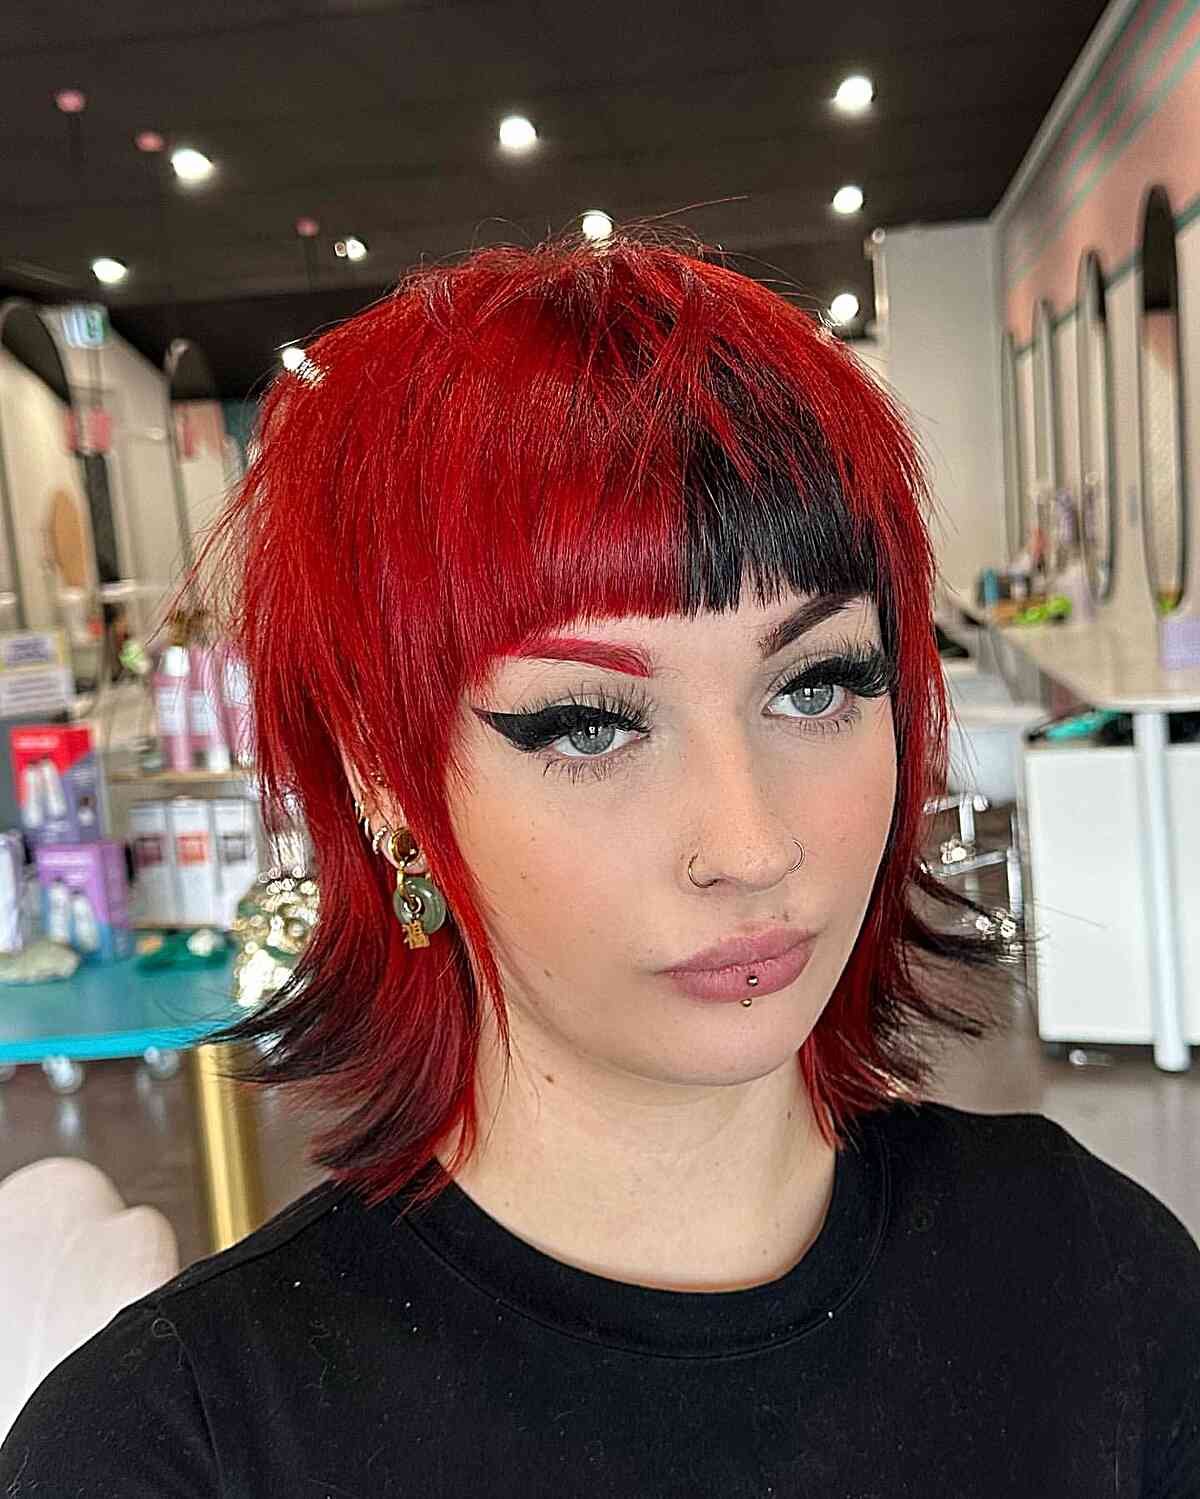 Share more than 89 mid length punk hairstyles - in.eteachers